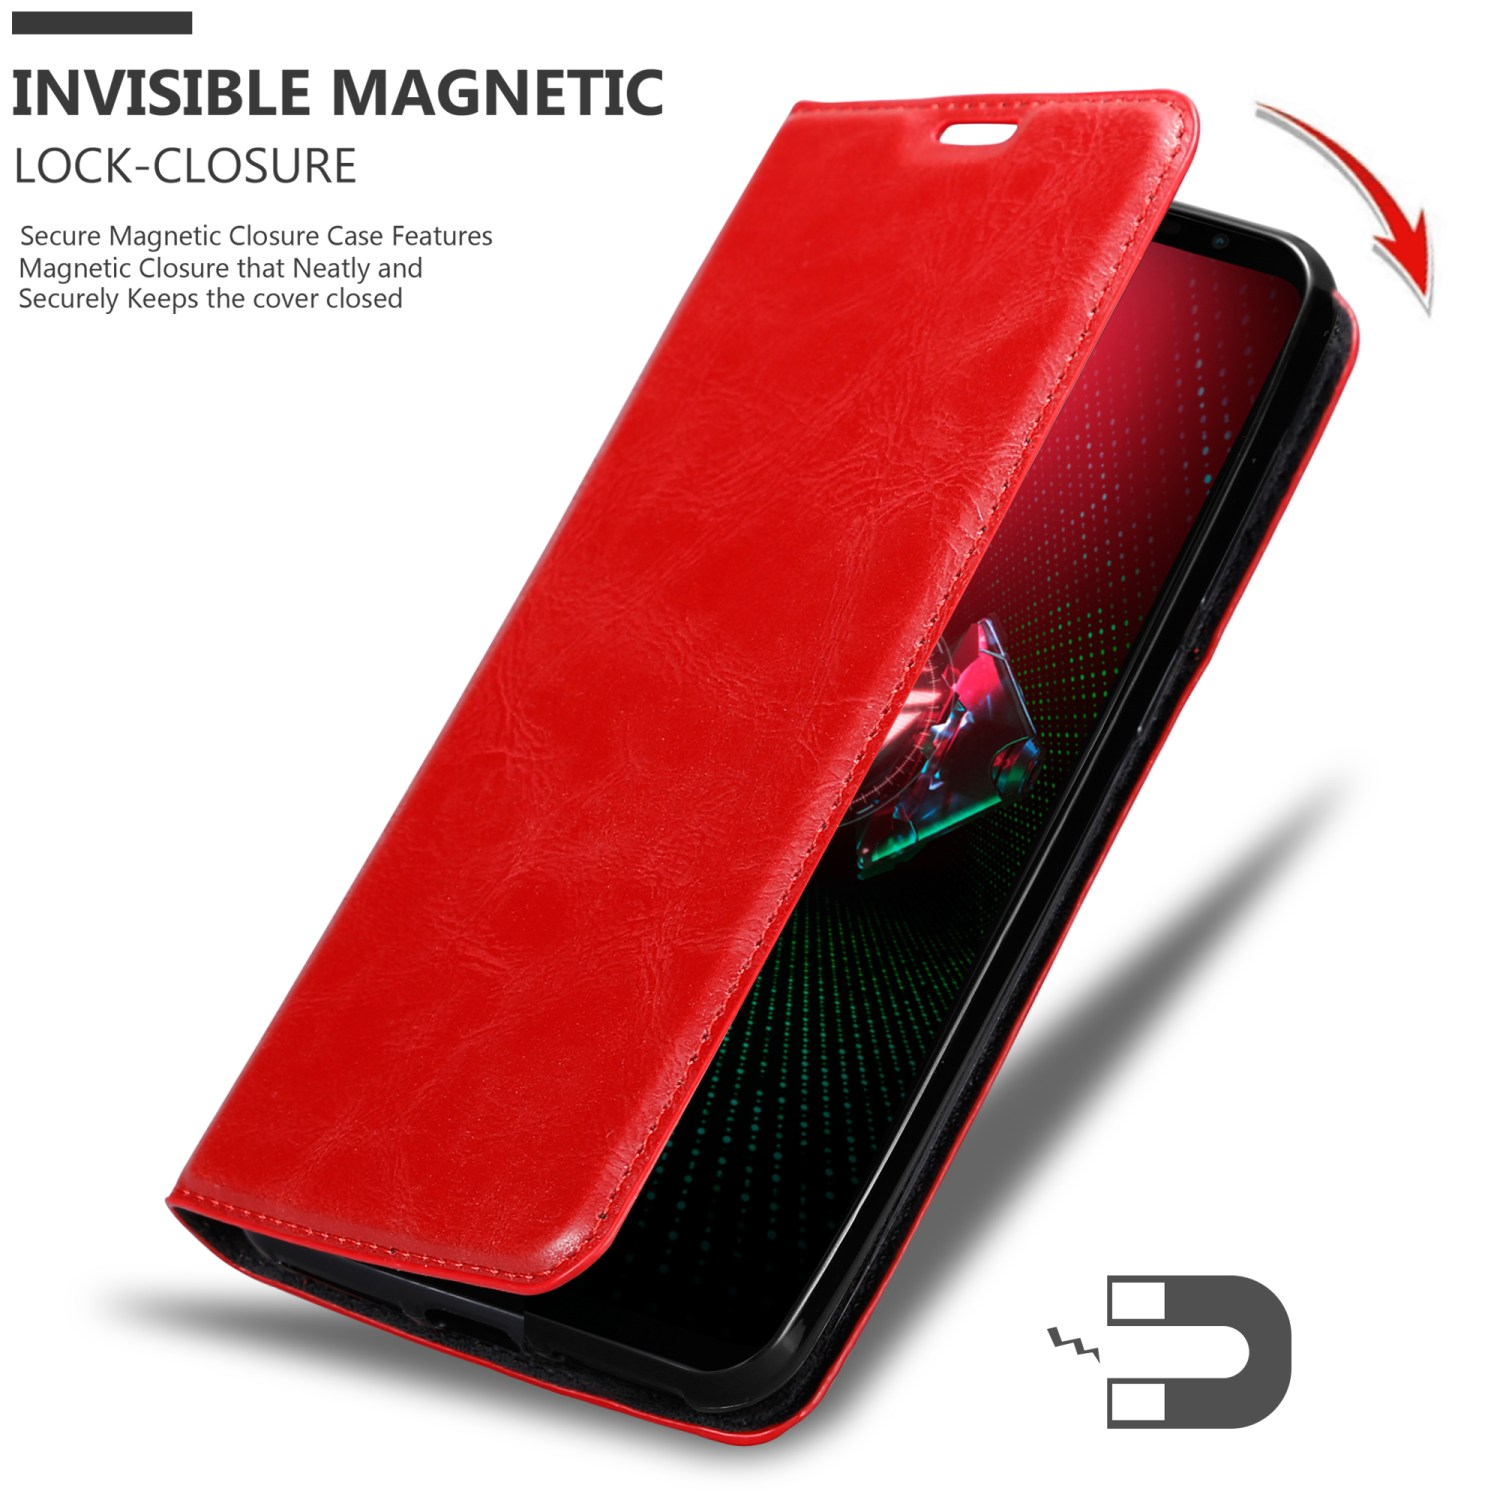 CADORABO Book Magnet, Invisible ROT Phone Hülle 5, Bookcover, Asus, APFEL ROG